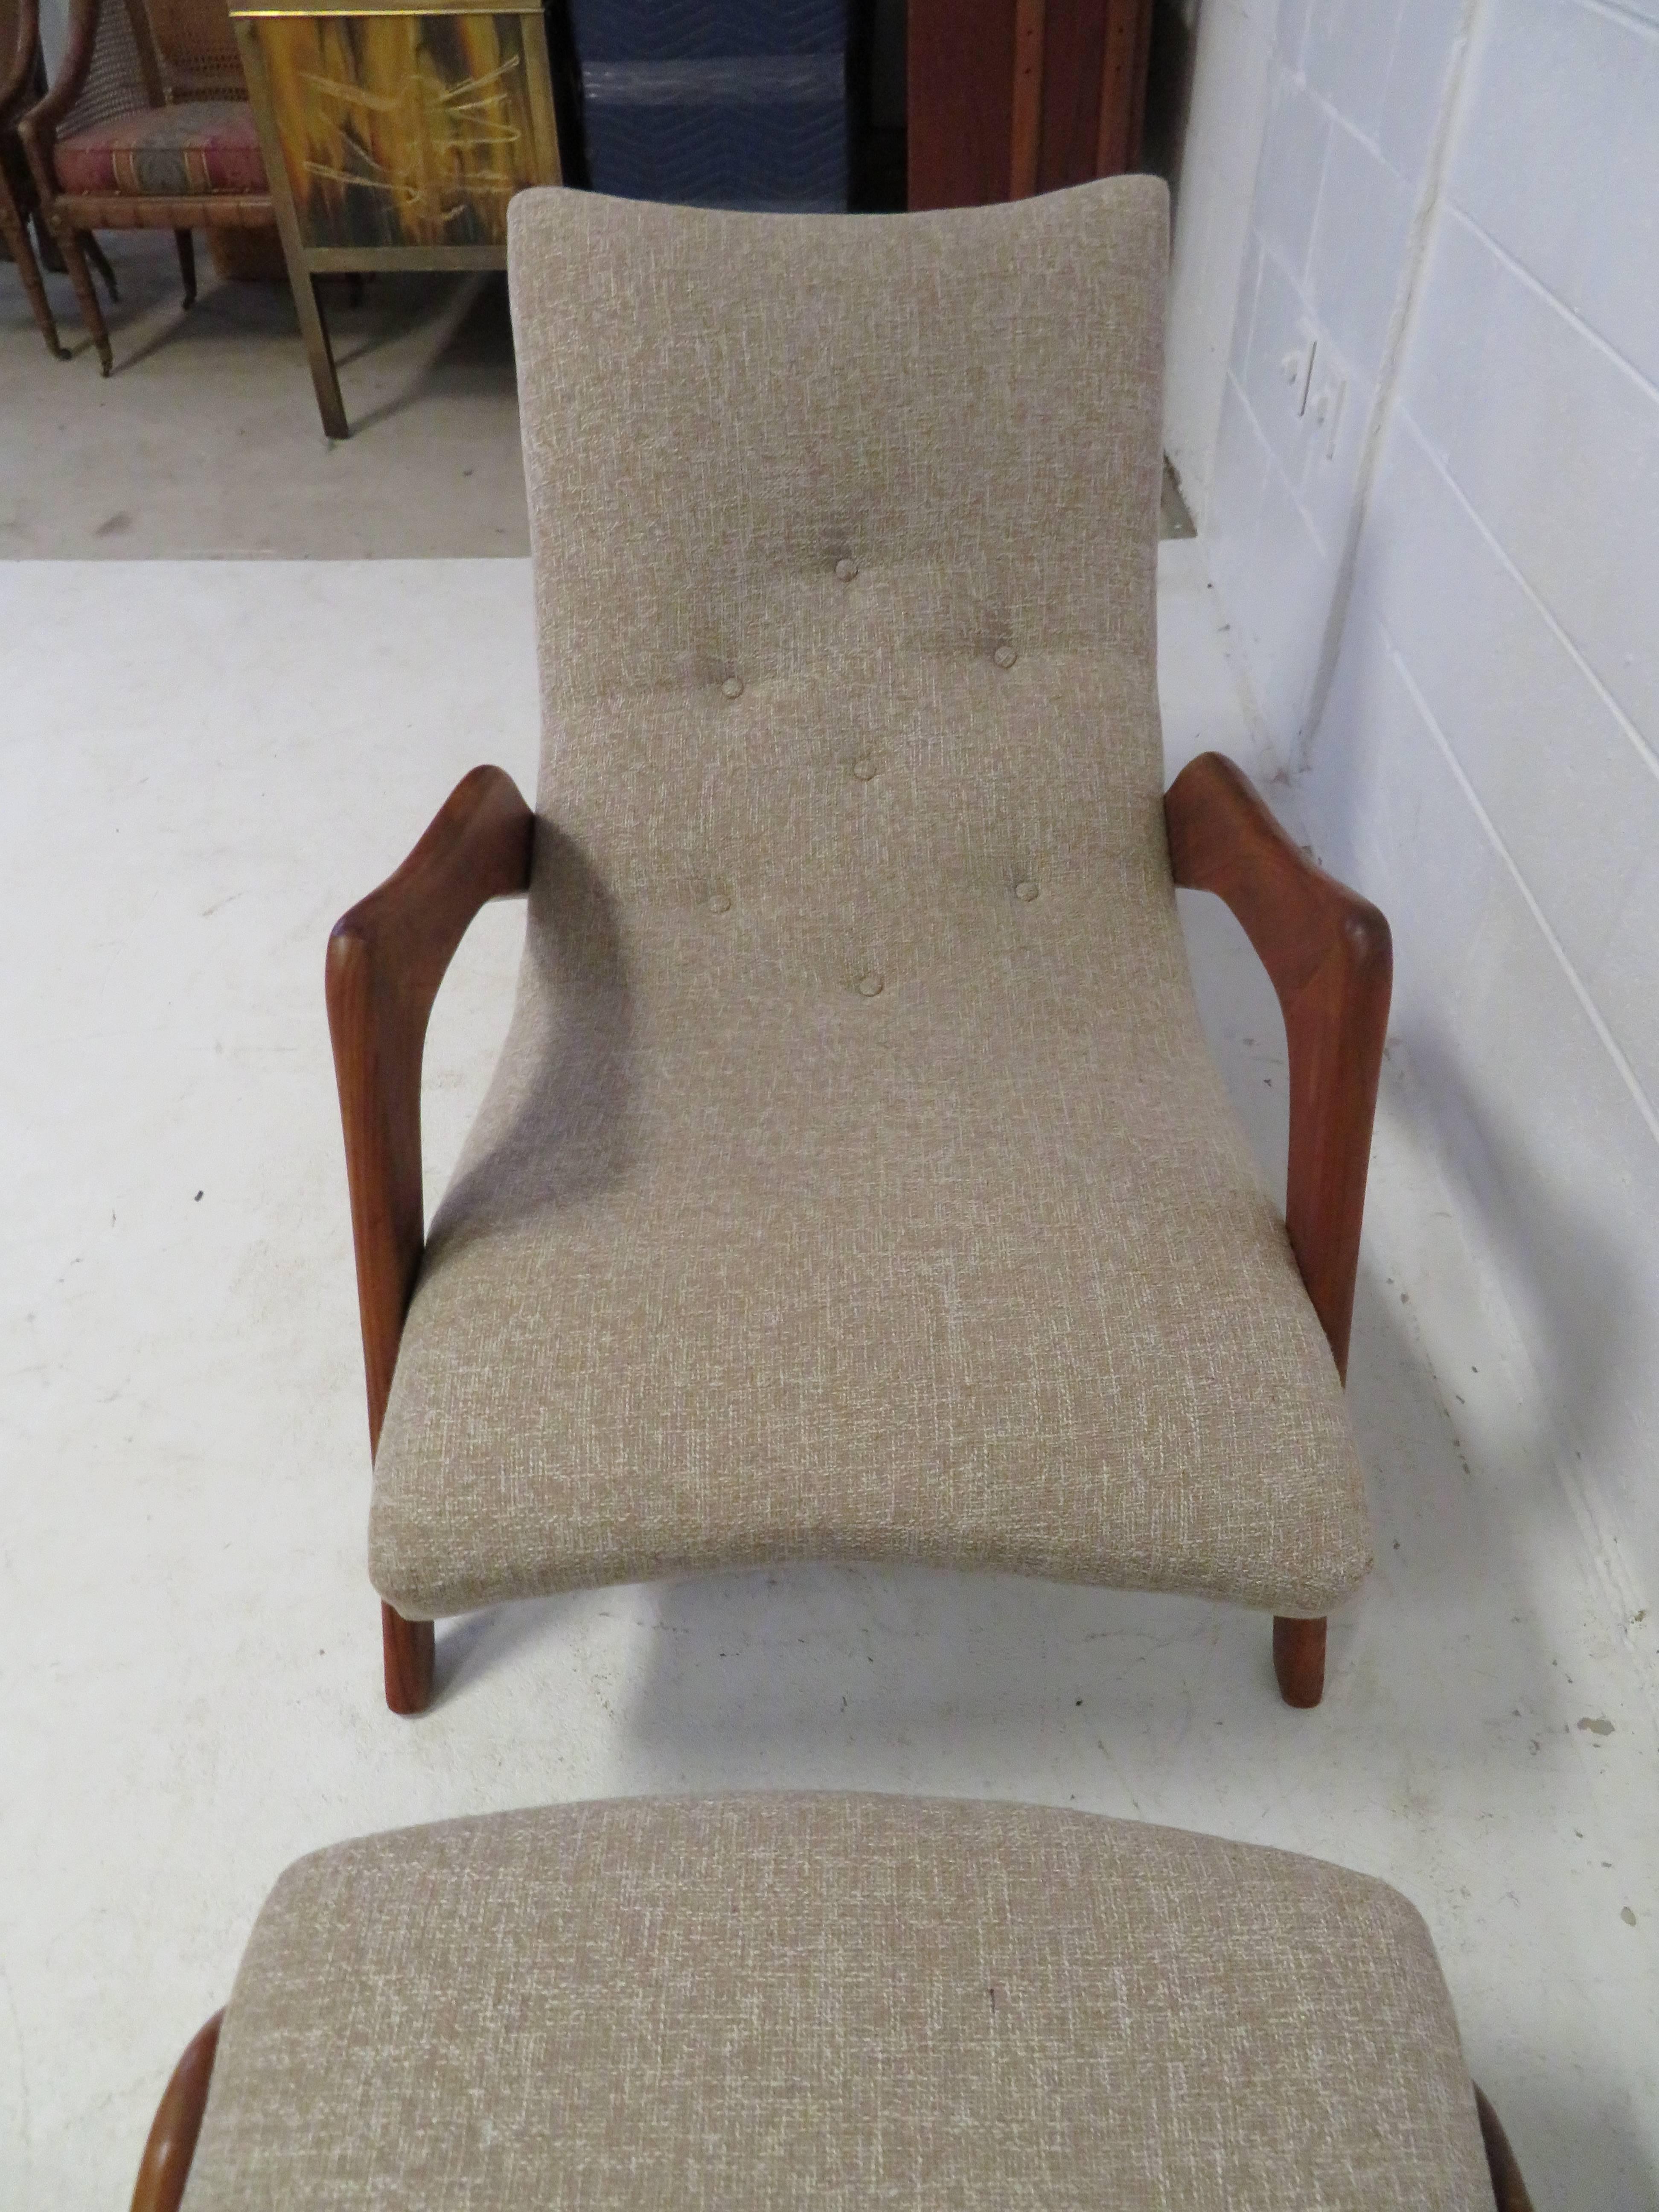 Excellent Adrian Pearsall sculptural walnut grasshopper chair with matching ottoman. Both pieces have recently been upholstered in a lovely period appropriate beige tweed and look great. The sculptural walnut retains it original finish in nice